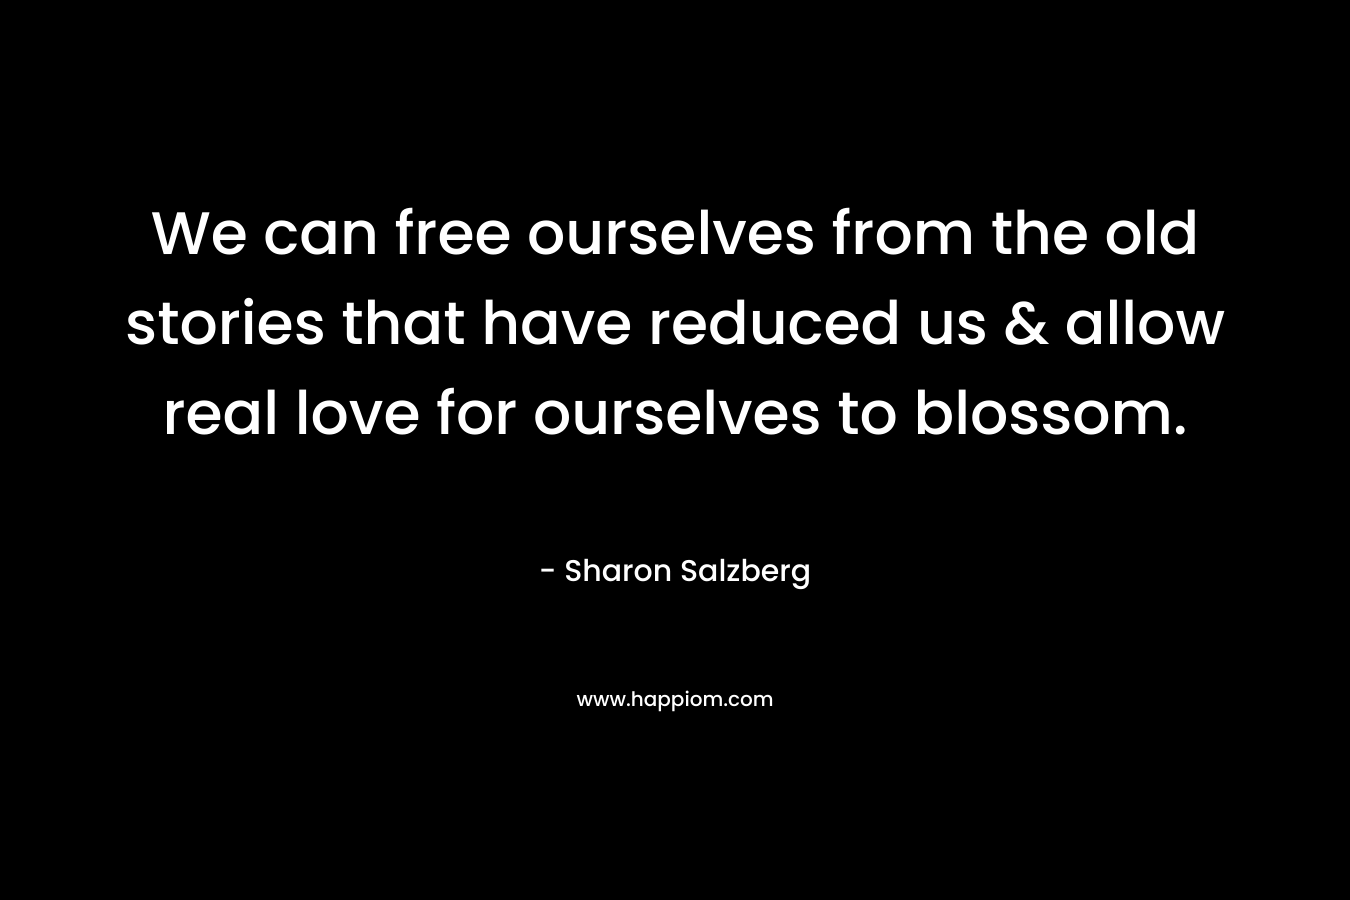 We can free ourselves from the old stories that have reduced us & allow real love for ourselves to blossom.